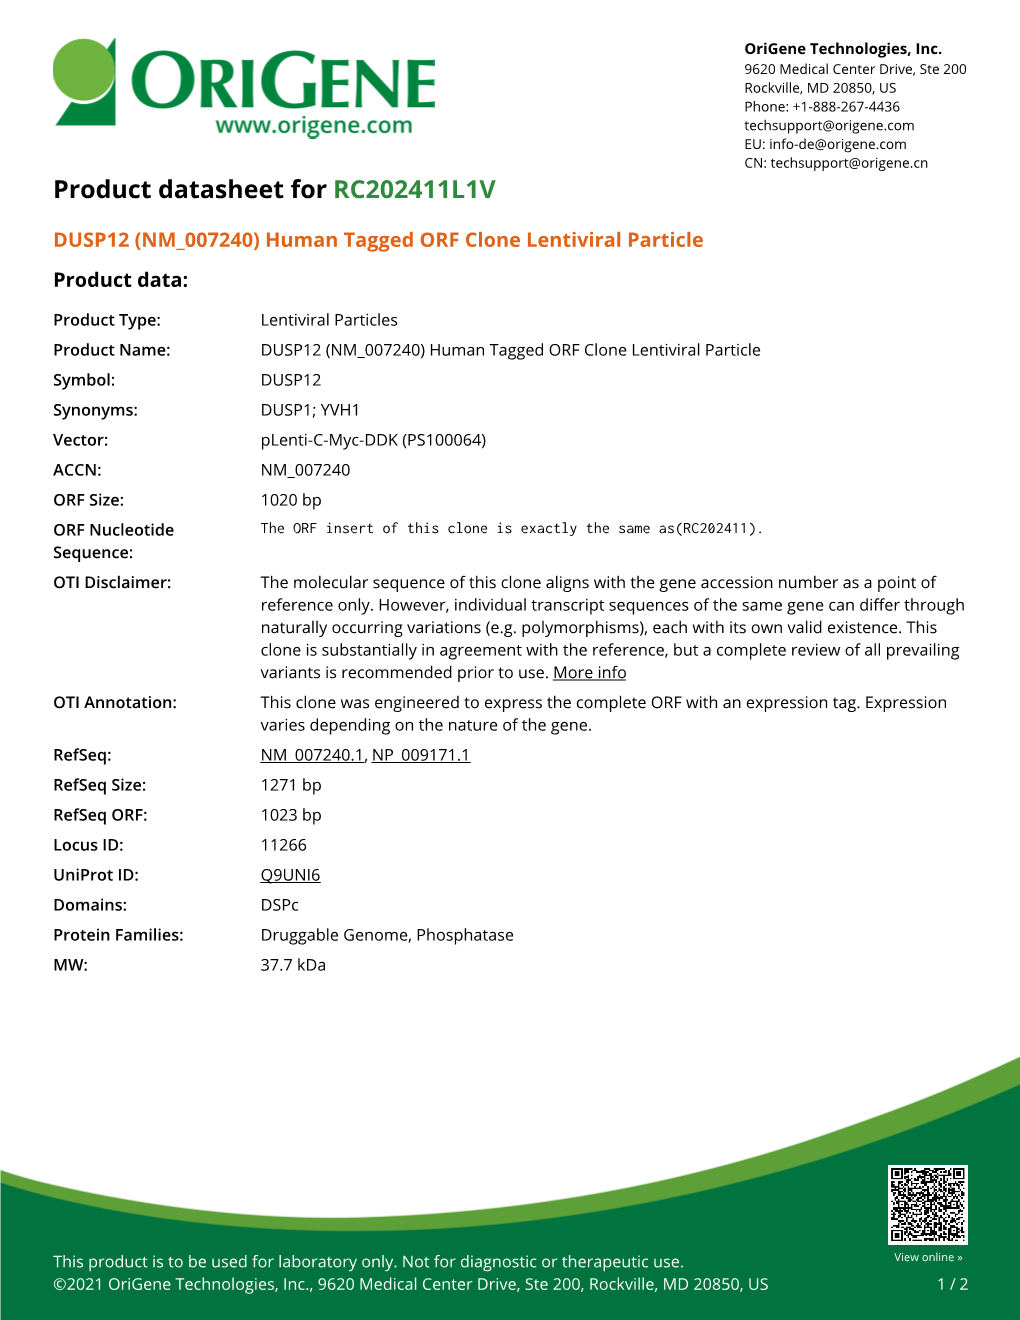 DUSP12 (NM 007240) Human Tagged ORF Clone Lentiviral Particle Product Data